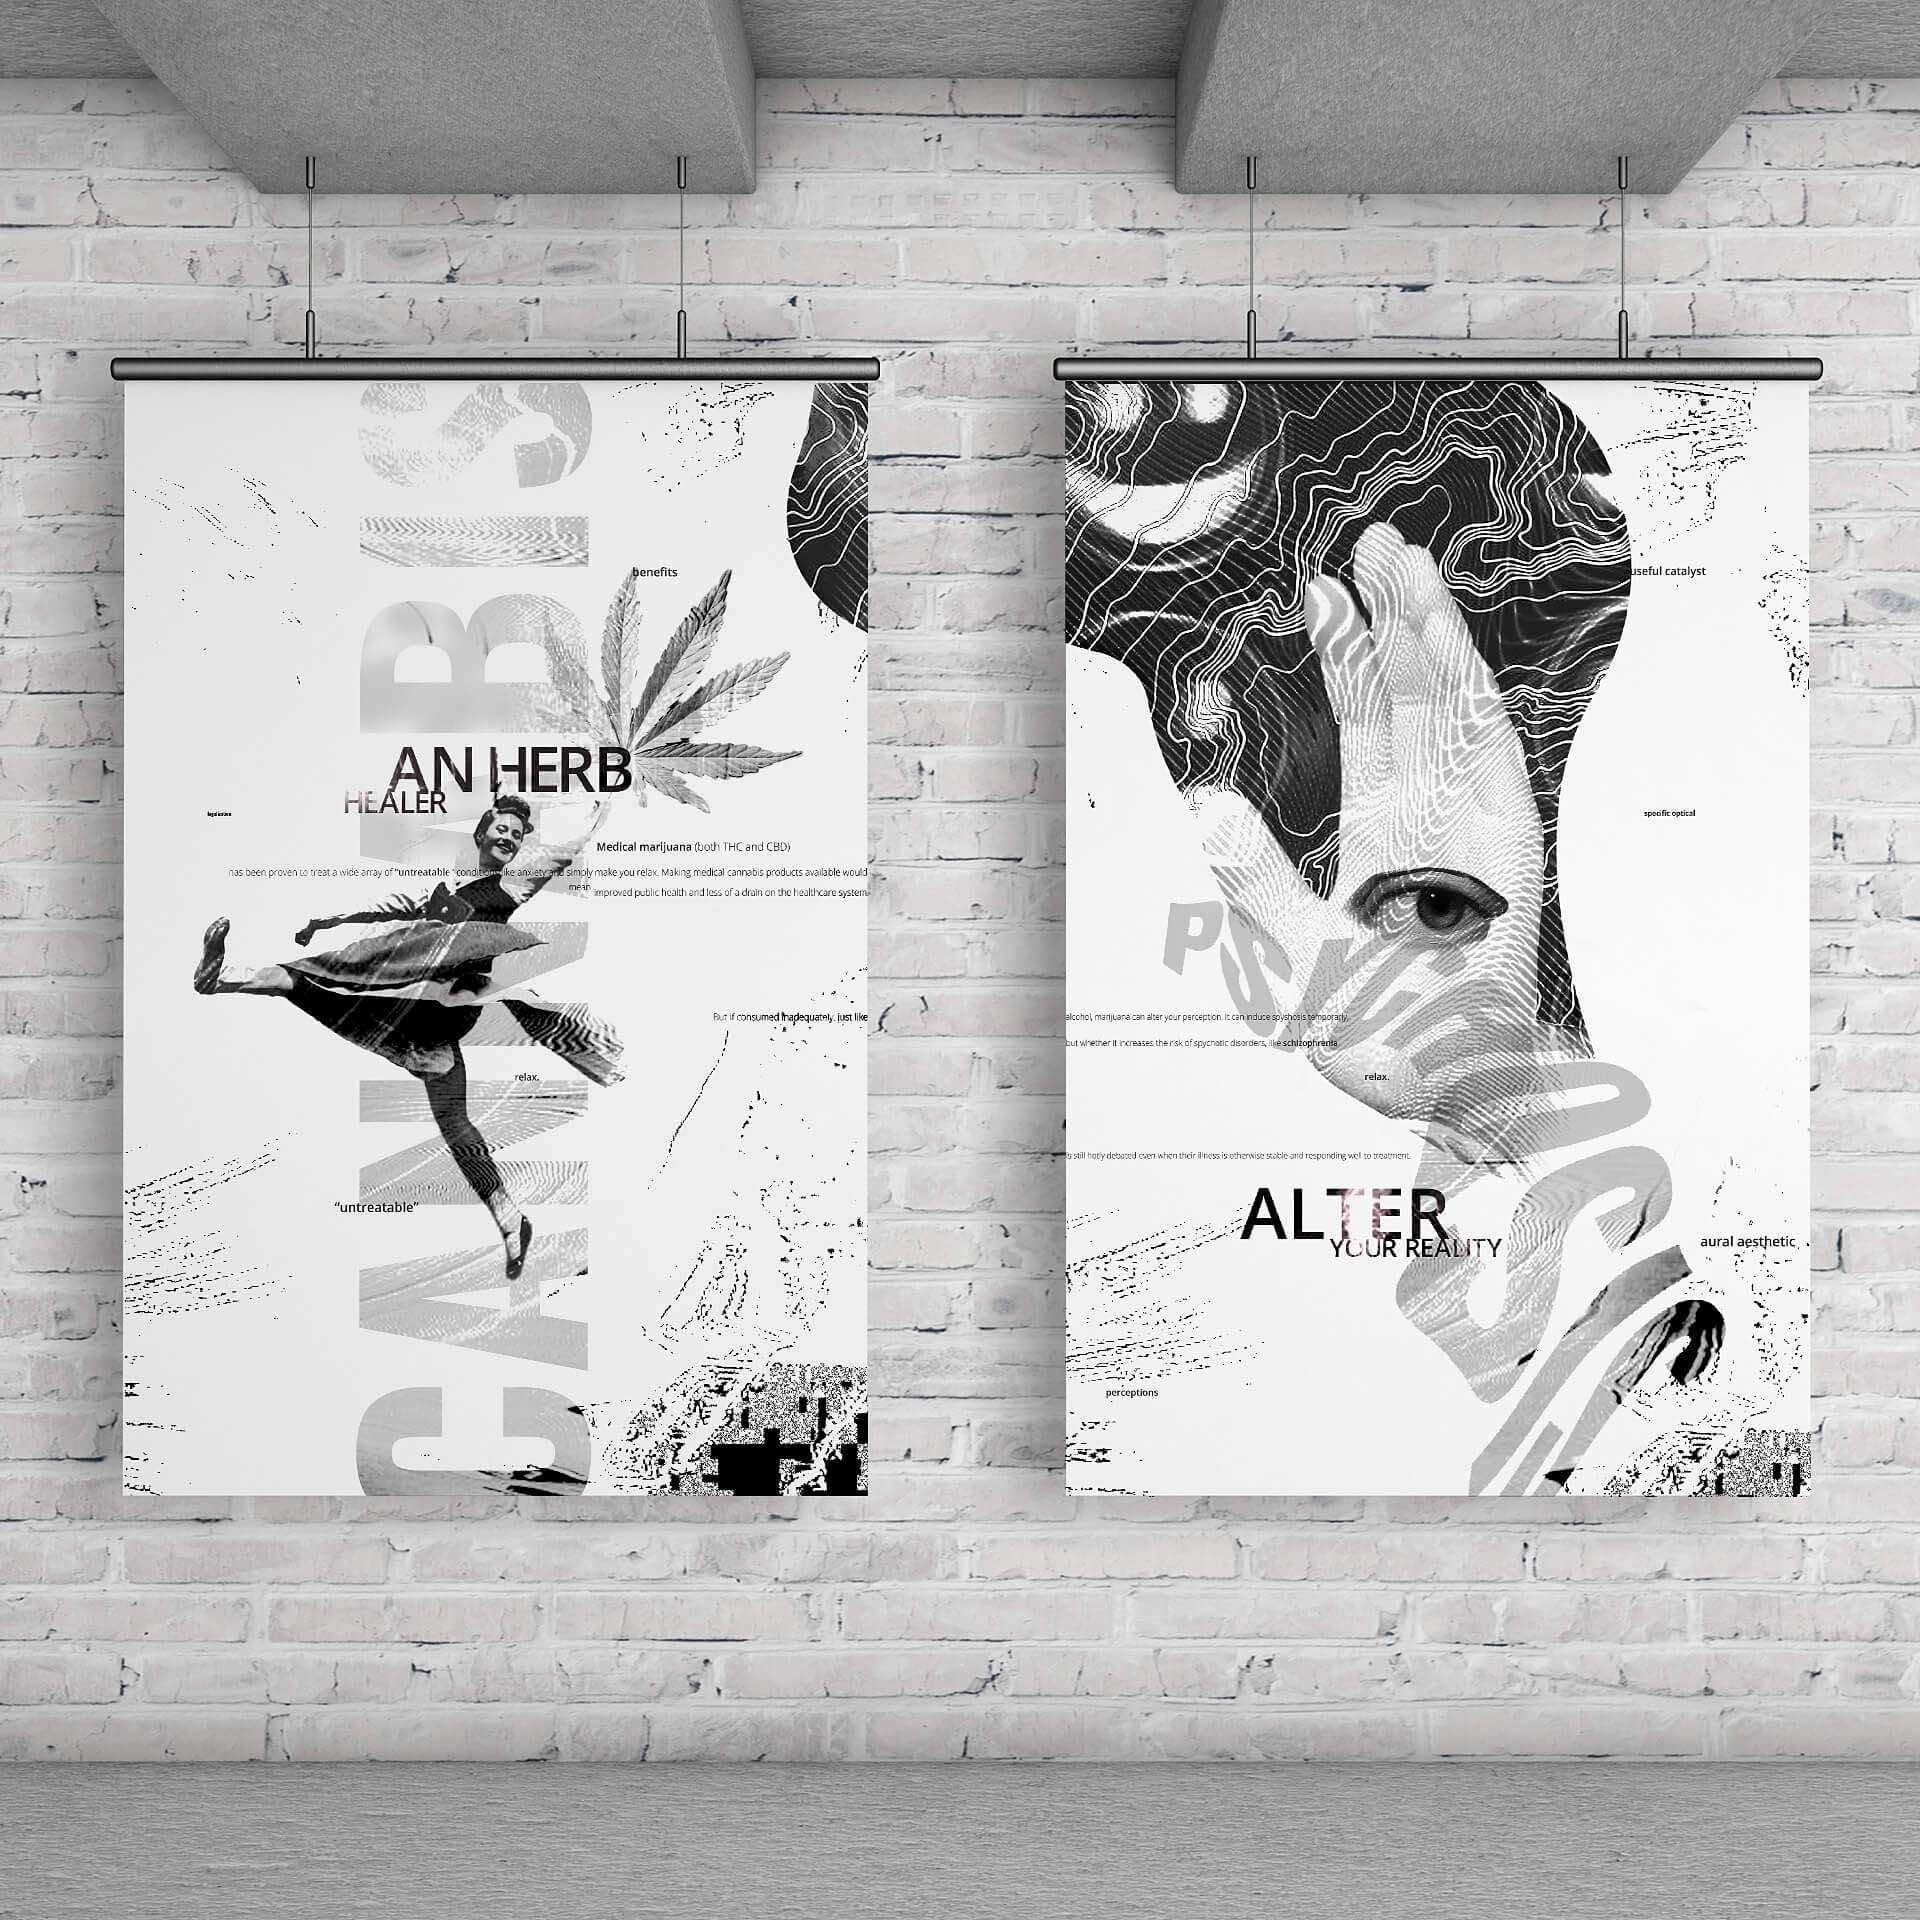 Two black and white posters hanging against a white brick wall. The left poster depicts a lady dancing below a giant cannabis leaf and text that says "An herb healer". Vertically across the page is large grey text that says "Cannabis". The right poster depicts a hand with an eye in the palm in front of a black splotch with decorative white lines inside. Running down the arm is warped grey text that reads "Psychosis". A smaller black title reads "Alter your reality".